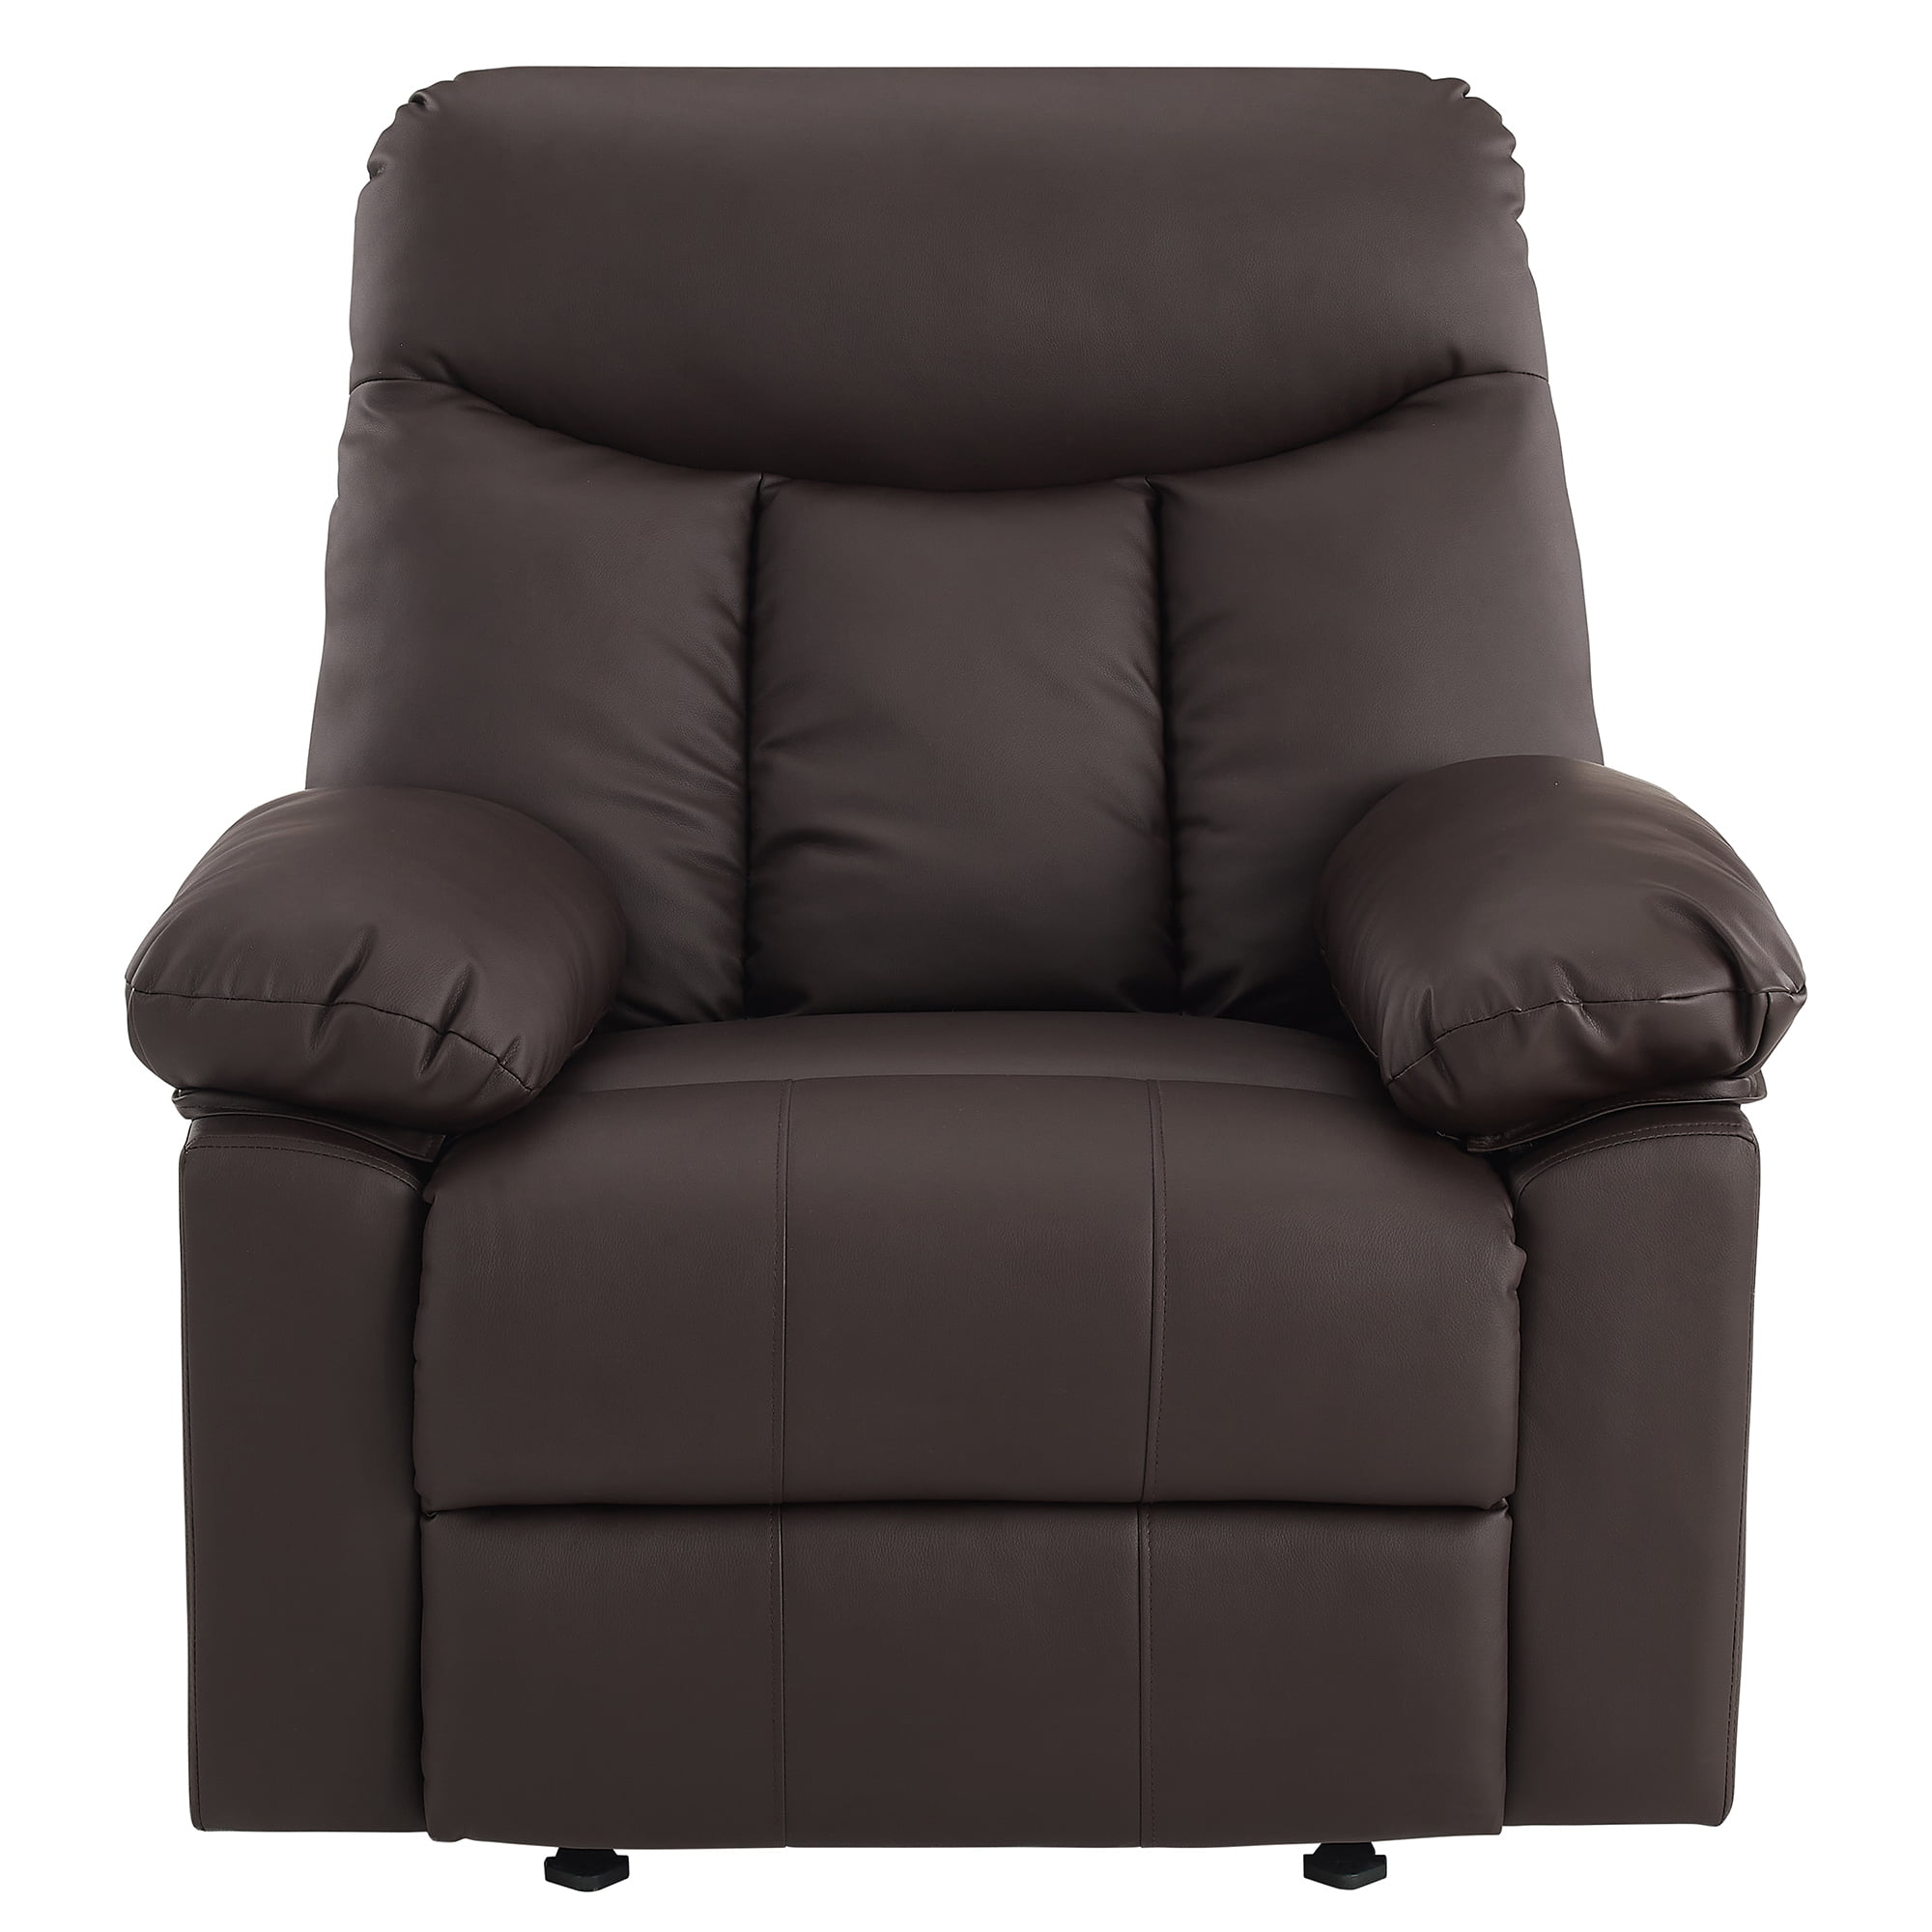 Hillsdale Bozeman Oversized Glider Rocker Recliner with USB (Various colors) $289.00